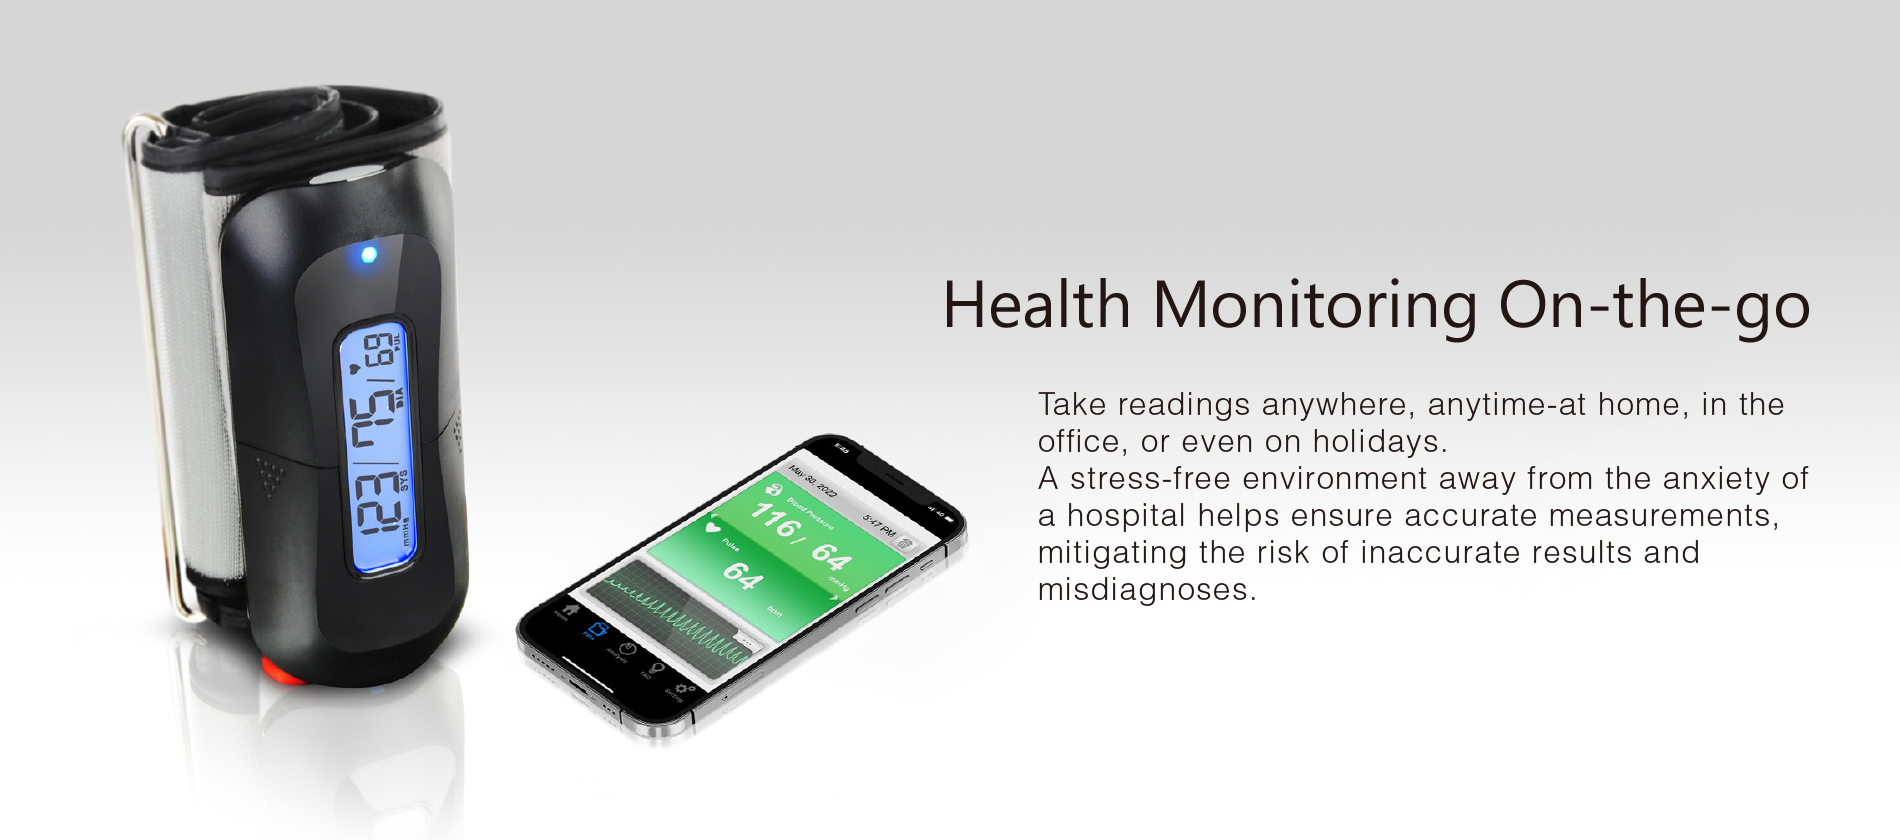 Health Monitoring On-the-go Take readings anywhere, anytime-at home, in the office, or even on holidays.